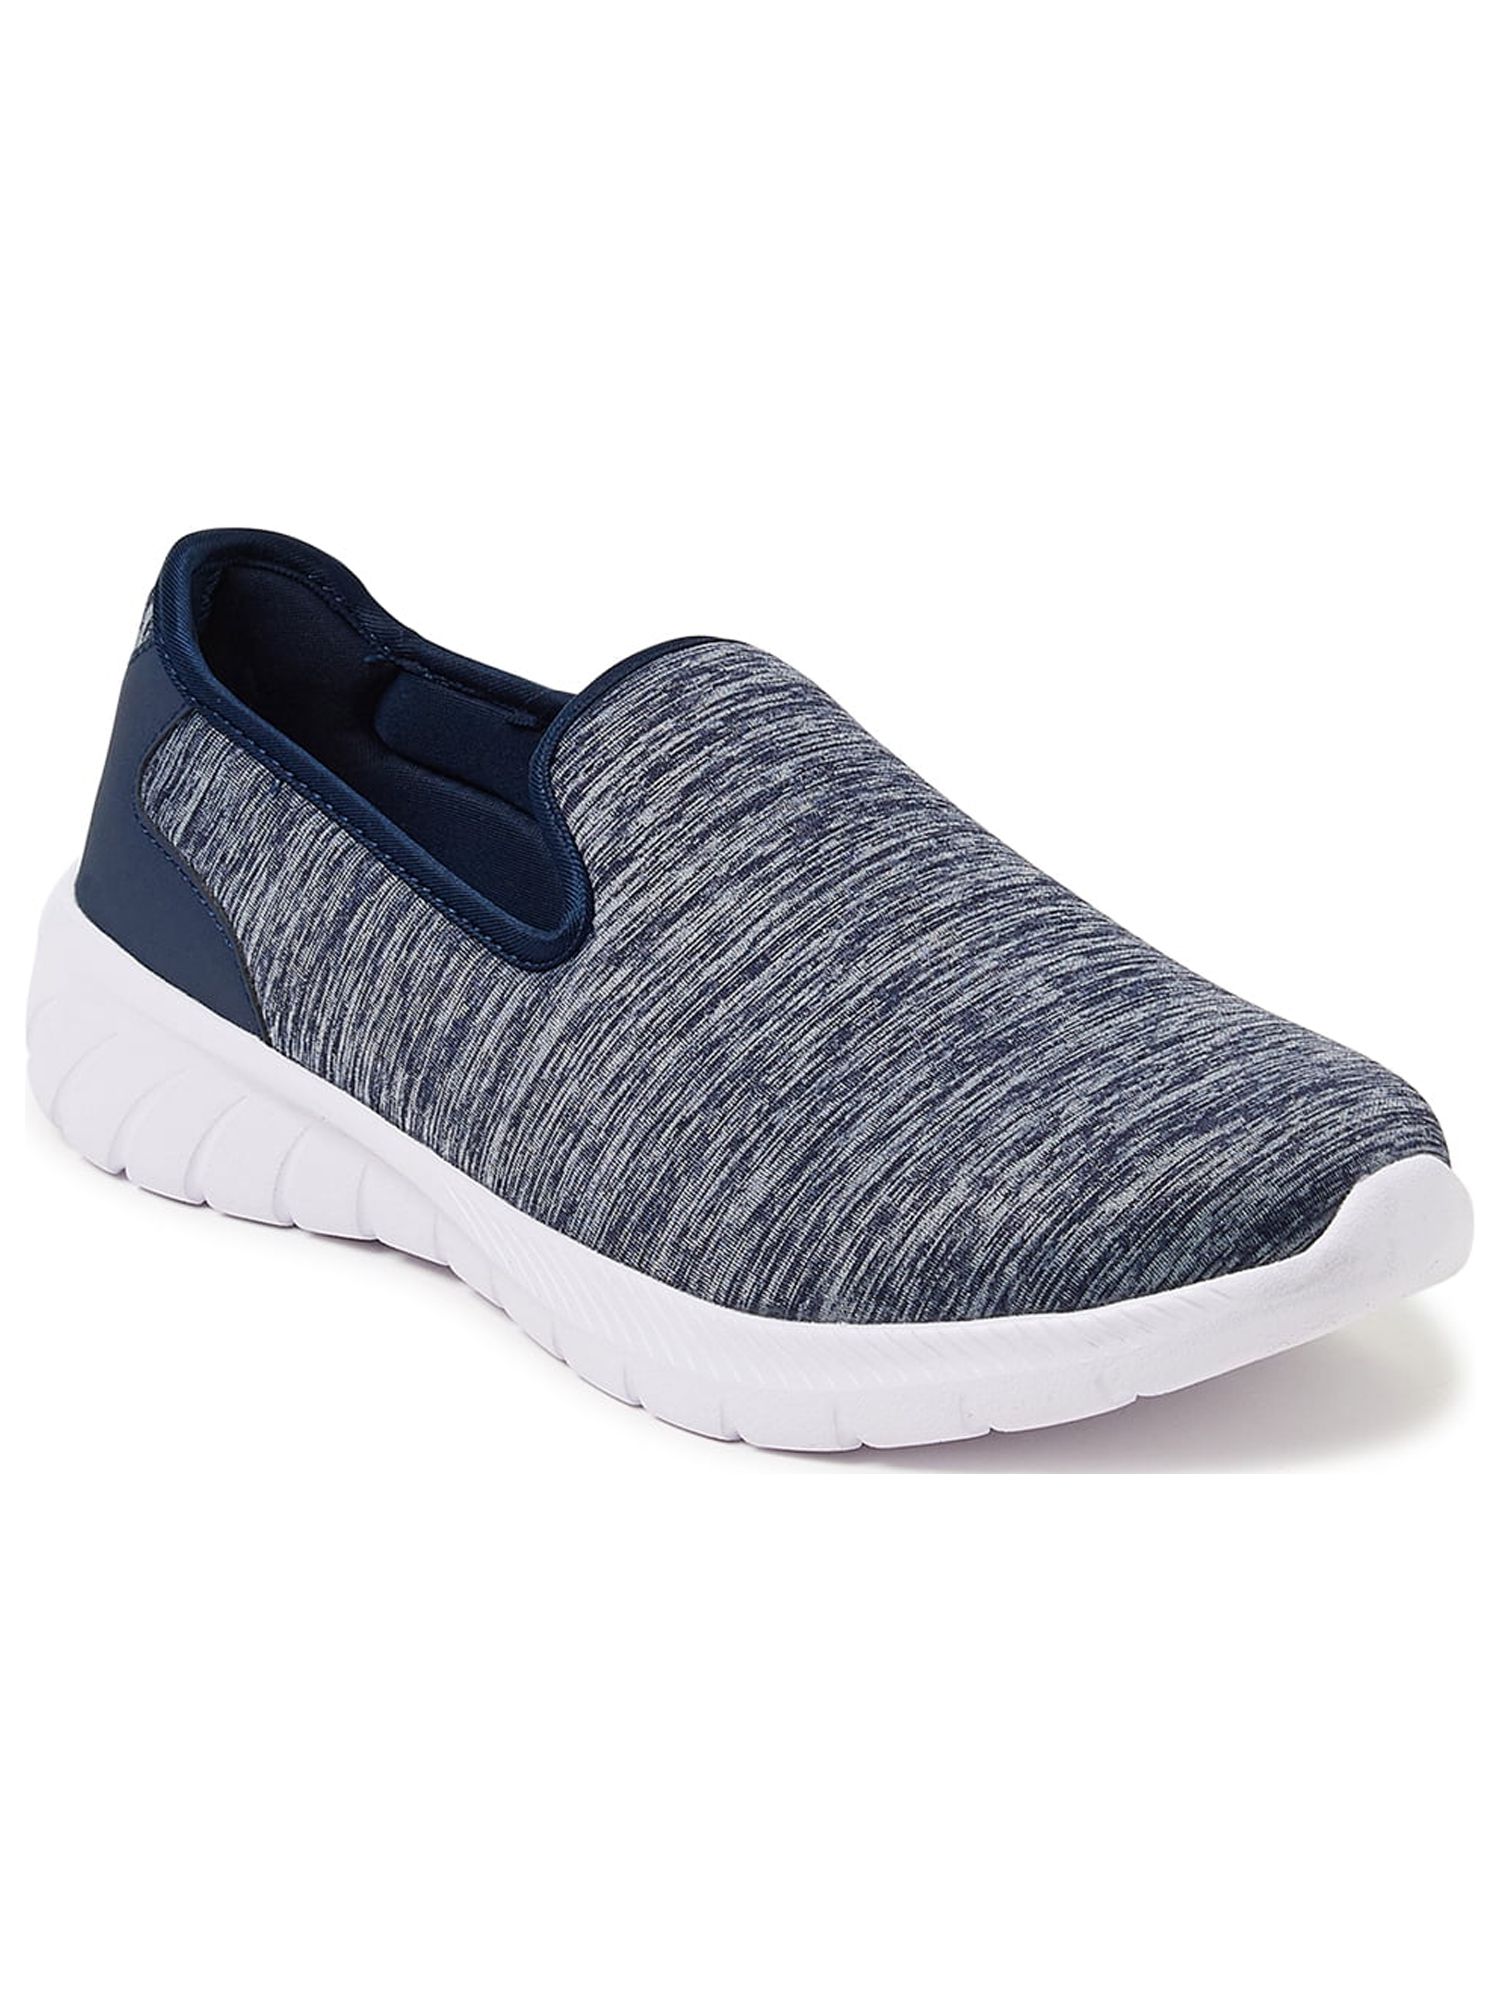 Athletic Works Women's Slip-On Sneakers (Wide Width Available) - image 1 of 6